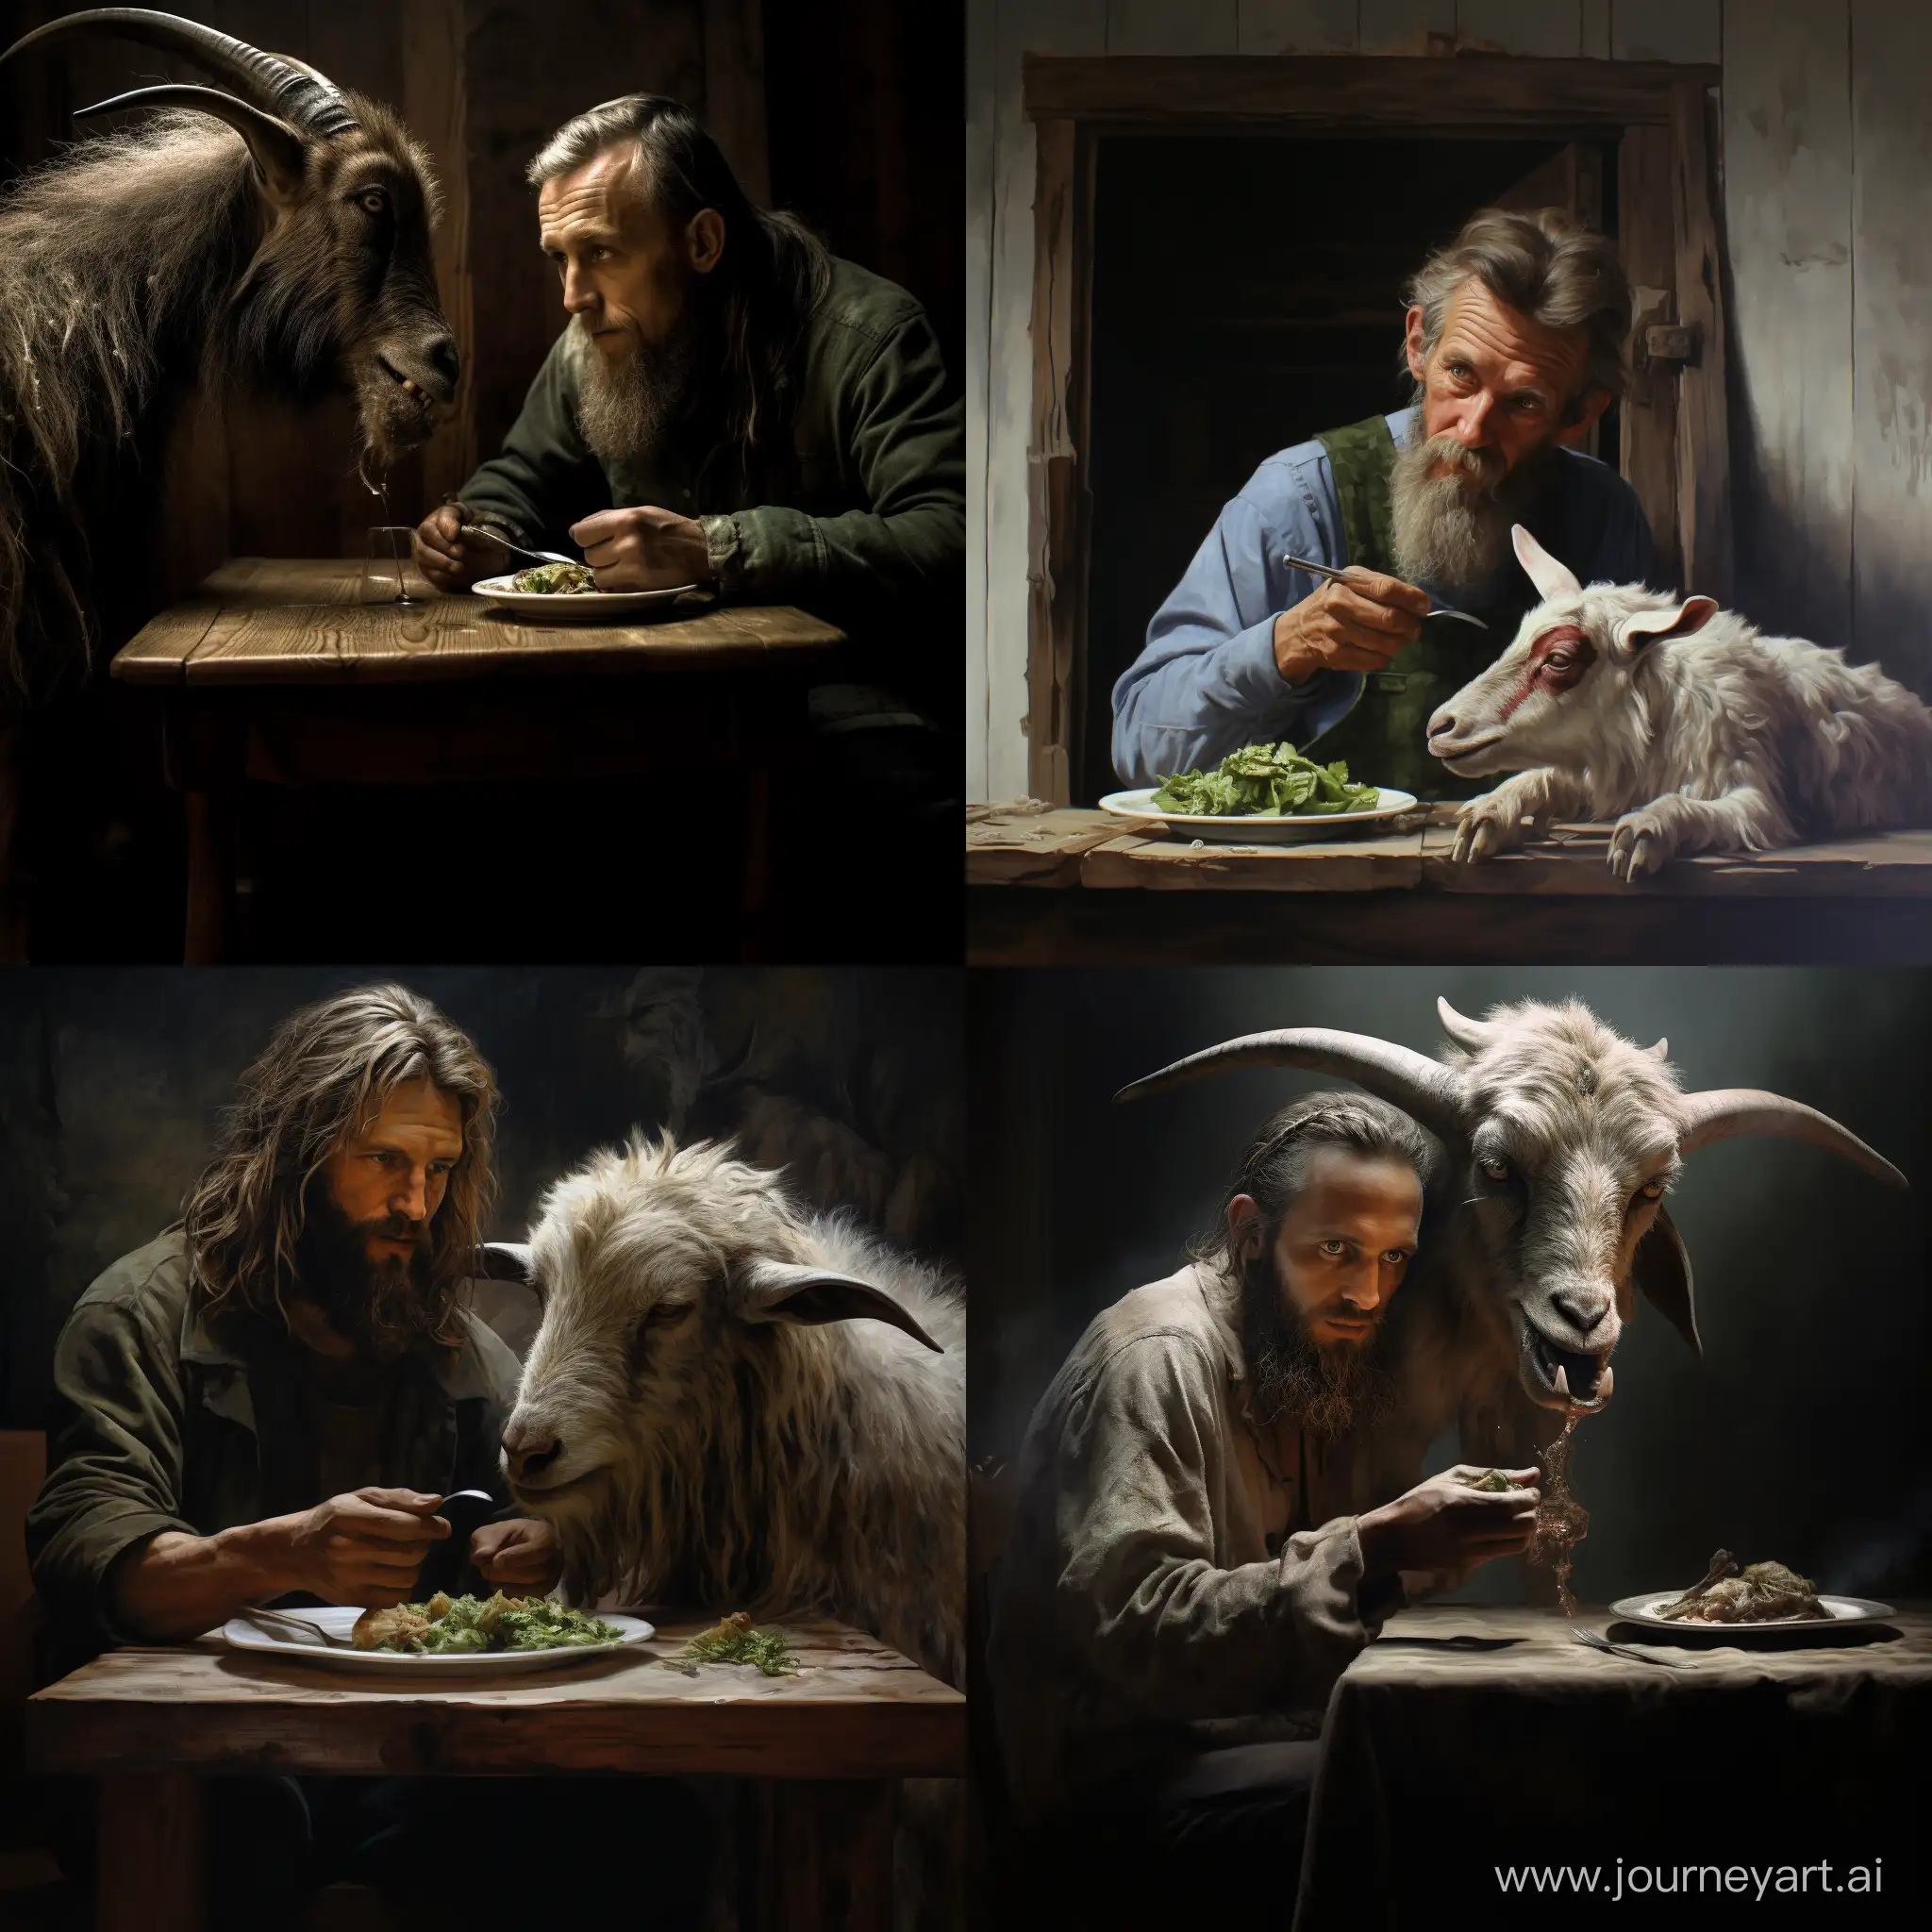 A man eating with goat